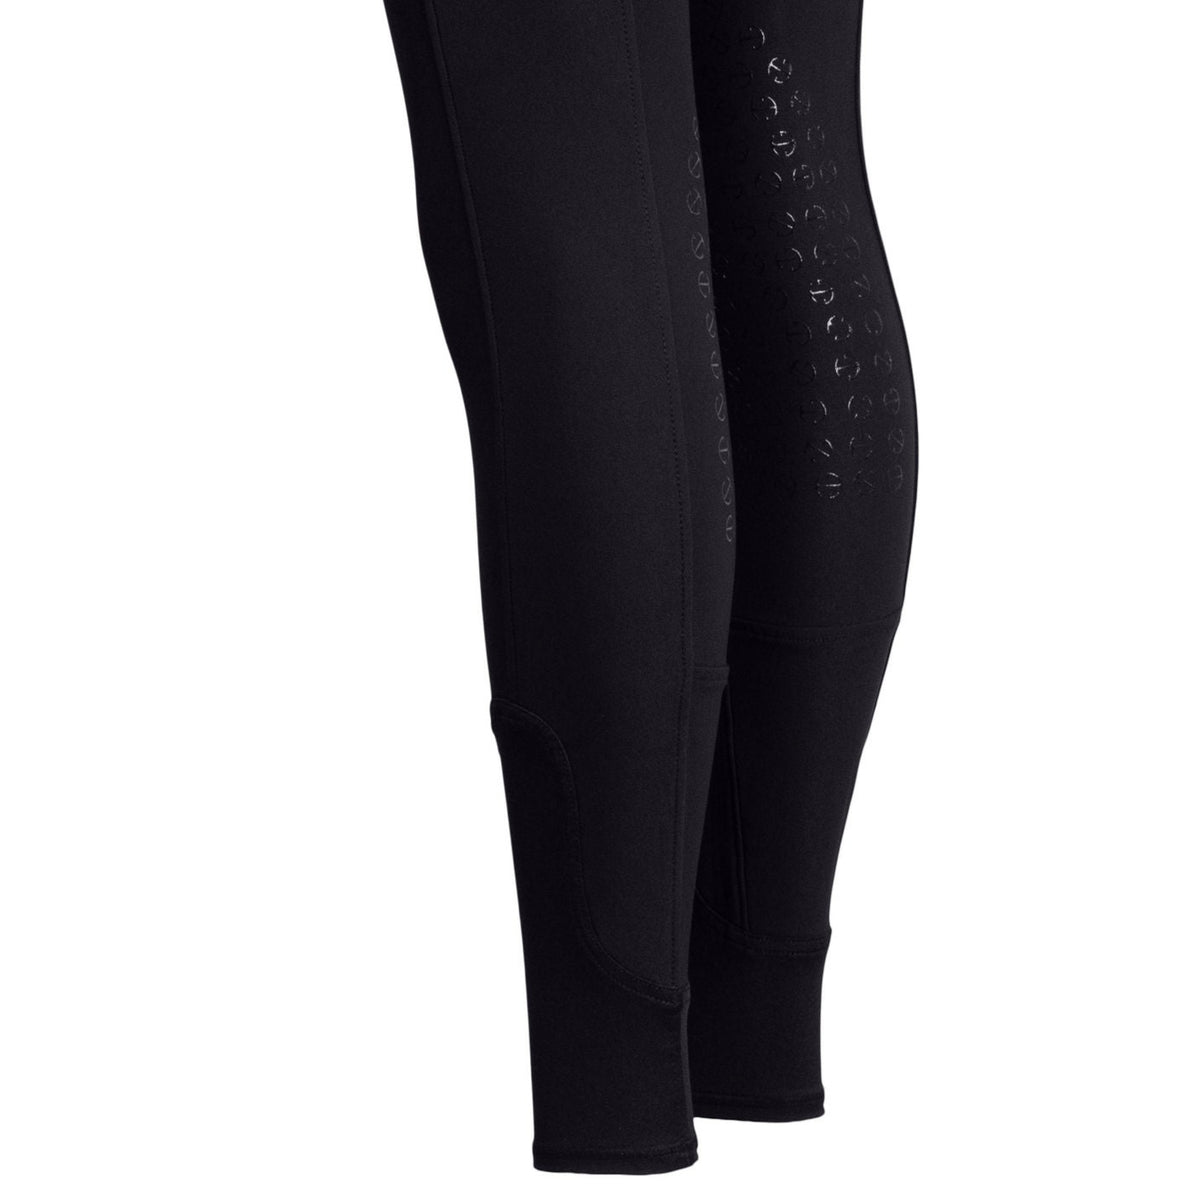 Evolution Knee Patch Breeches - Black with Anthracite